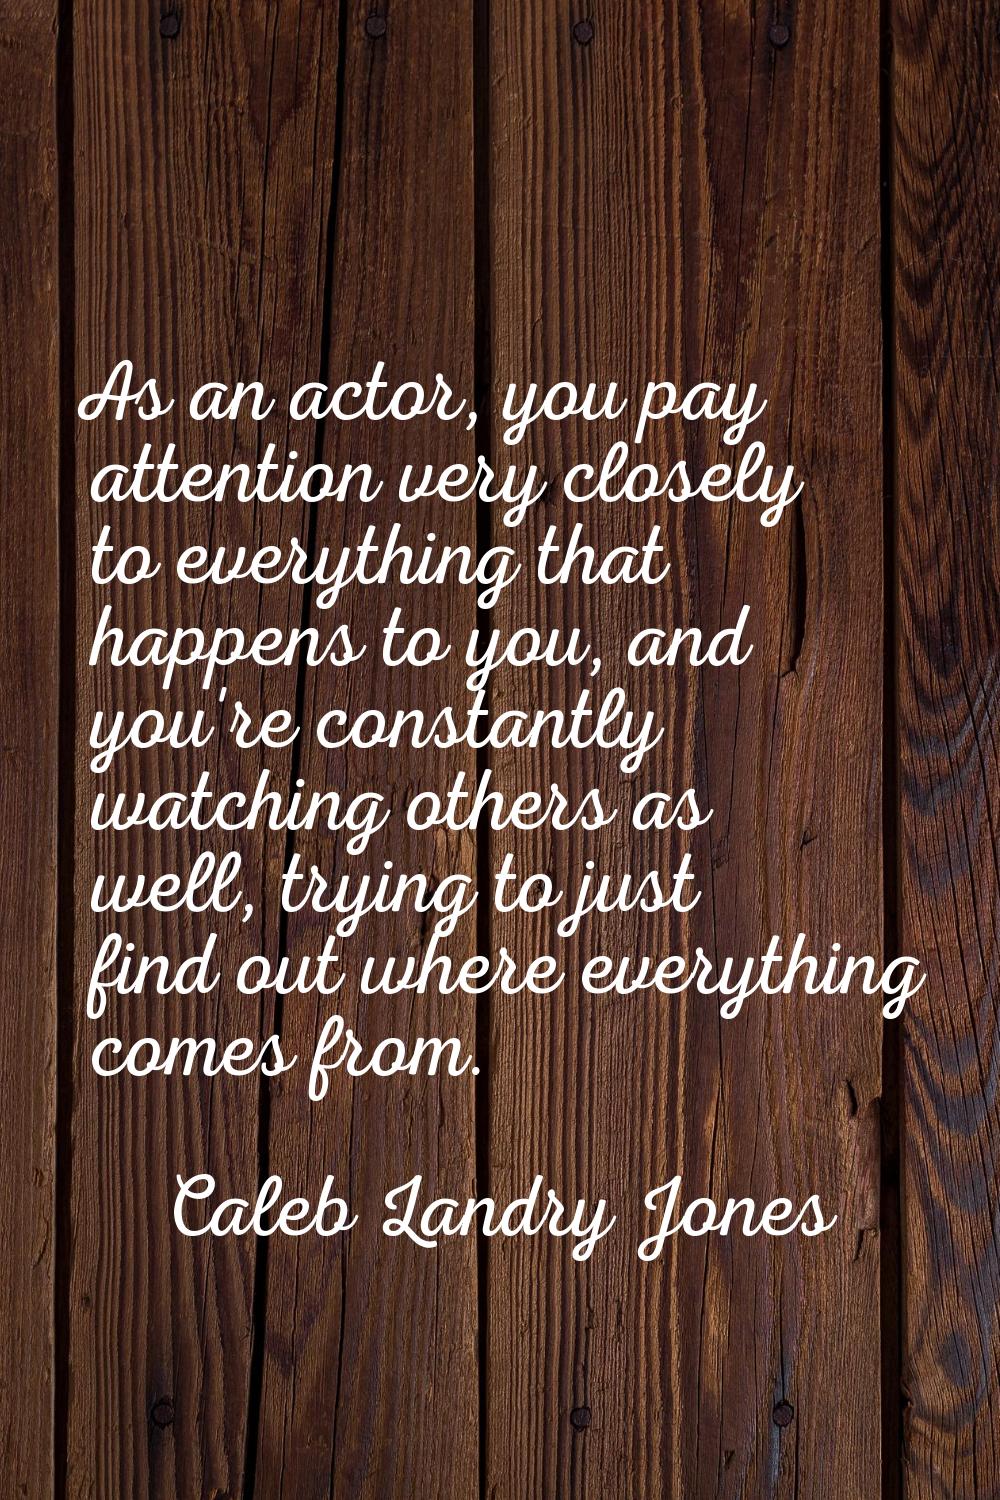 As an actor, you pay attention very closely to everything that happens to you, and you're constantl